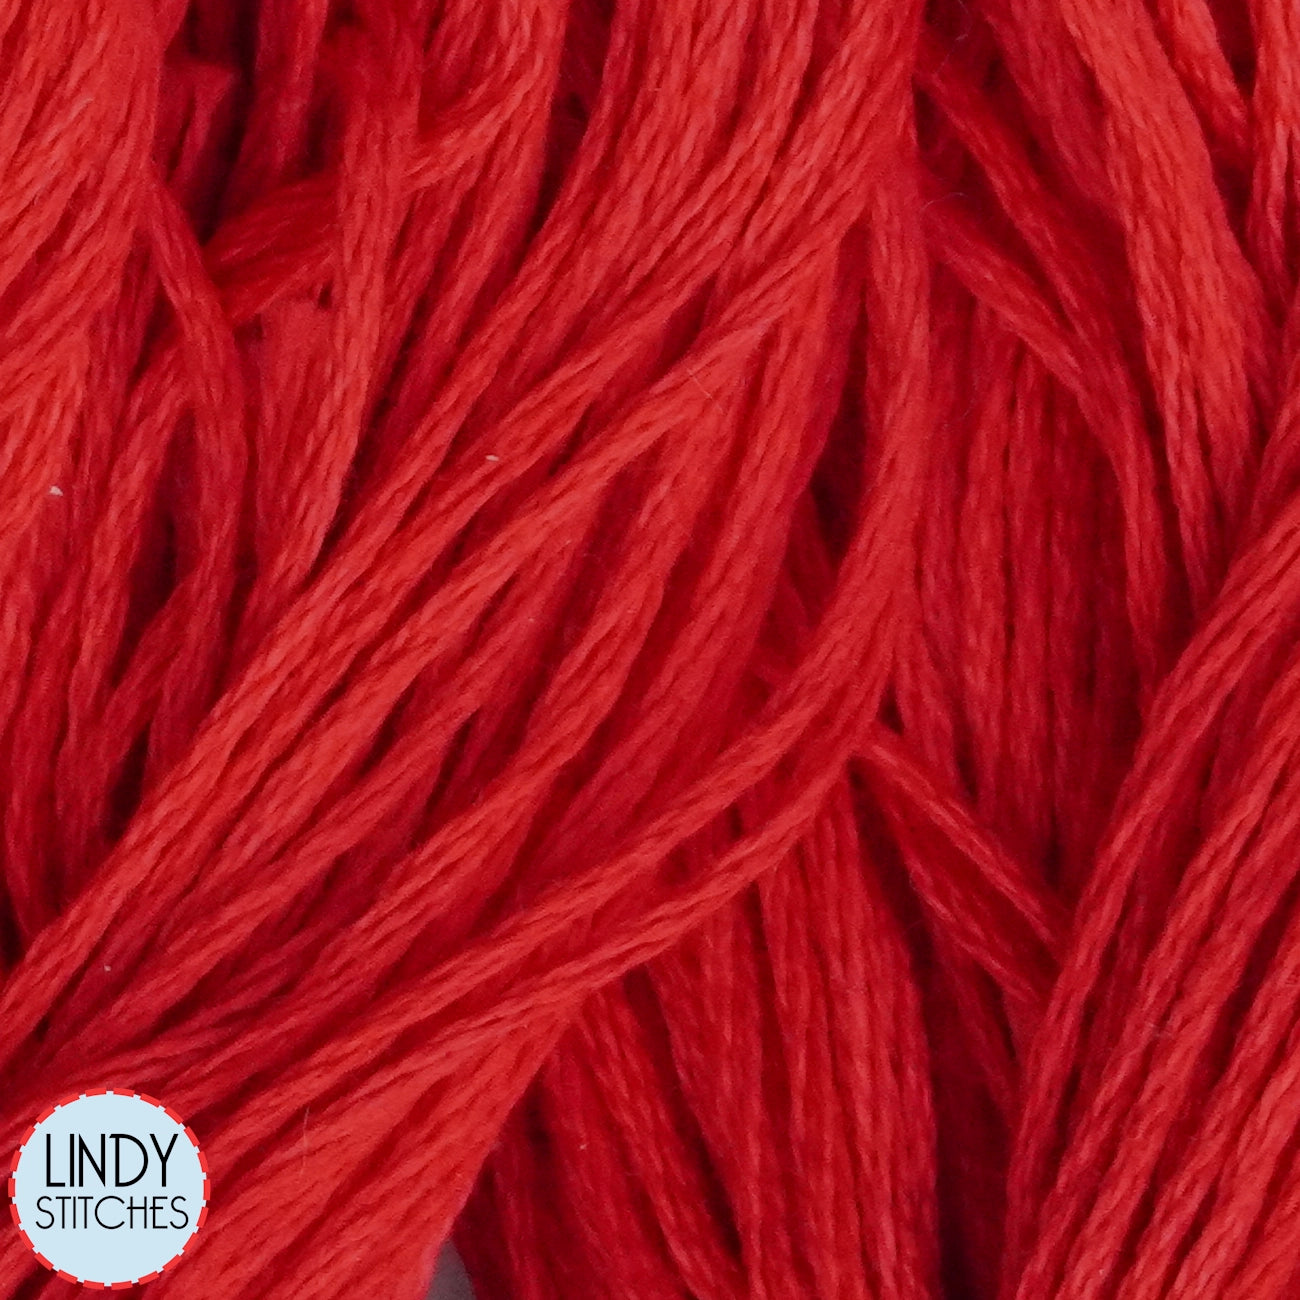 Candy Apple Weeks Dye Works Floss Hand Dyed Cotton Skein 2268a